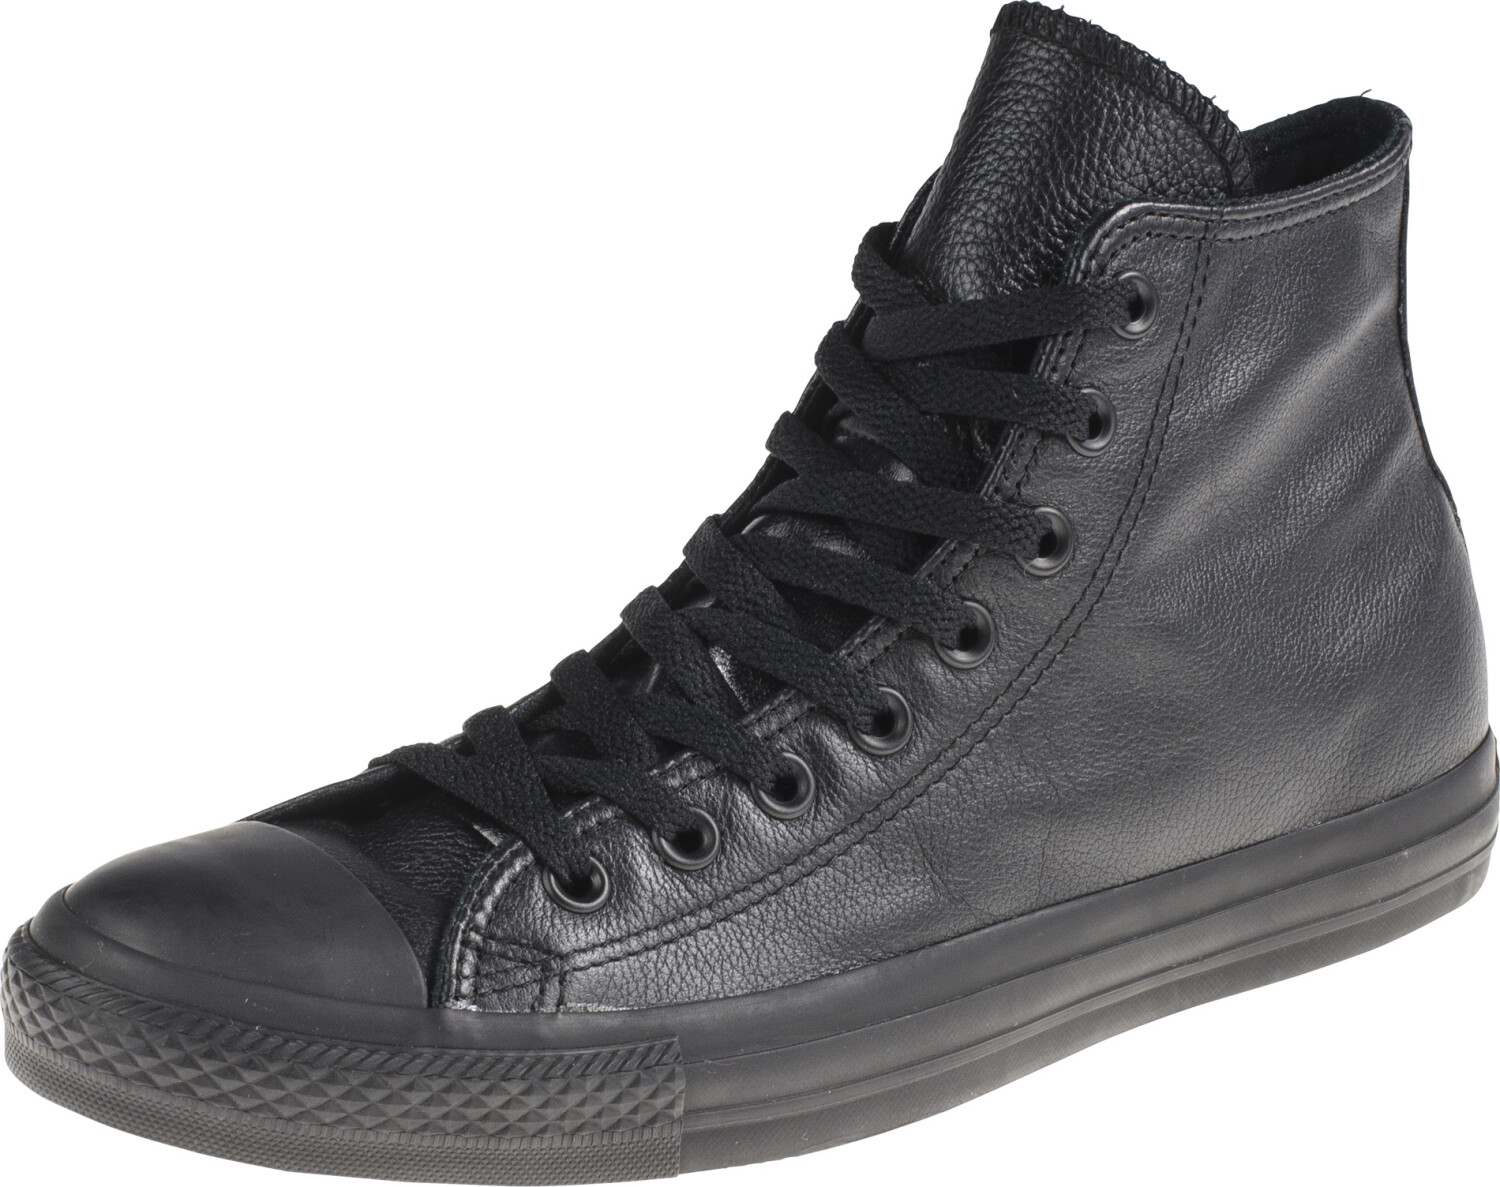 Converse CHUCK TAYLOR ALL STAR LEATHER OX Noir - Chaussure pas